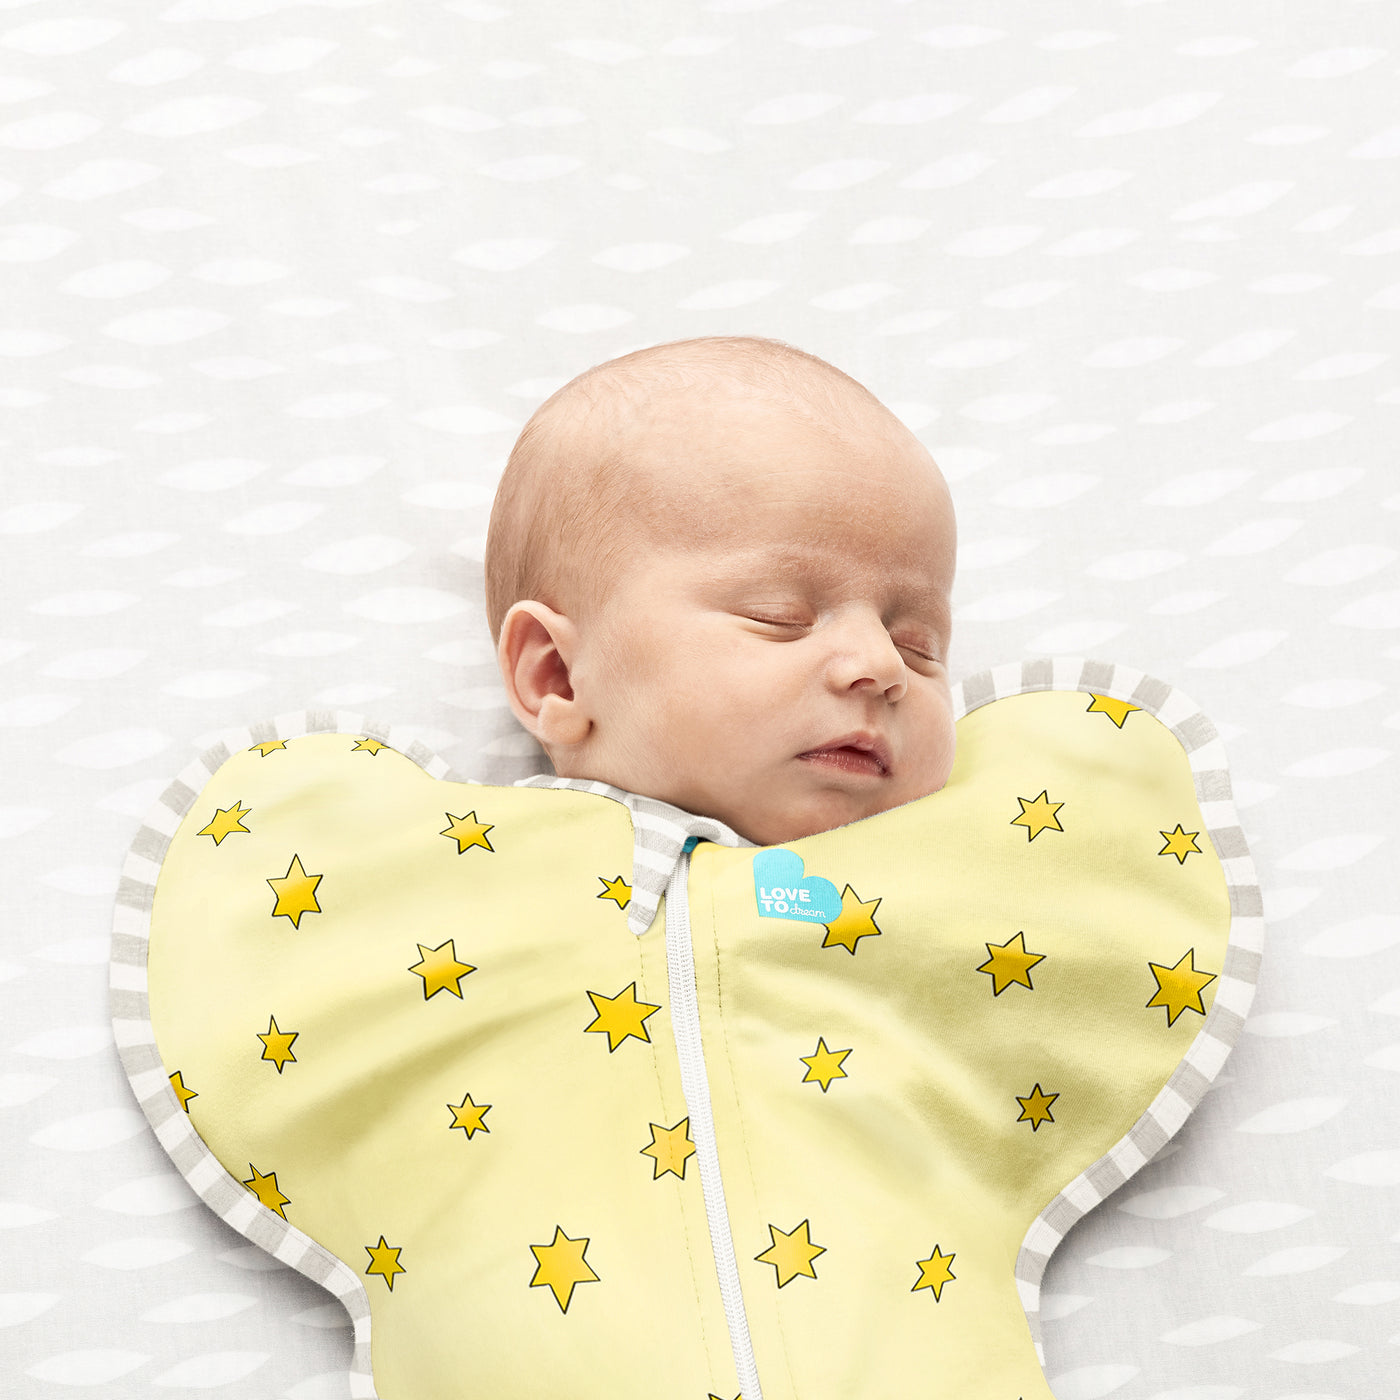 Swaddle Up™ Bamboo Lite 0.2 TOG - Yellow - Love to Dream™ NZ 